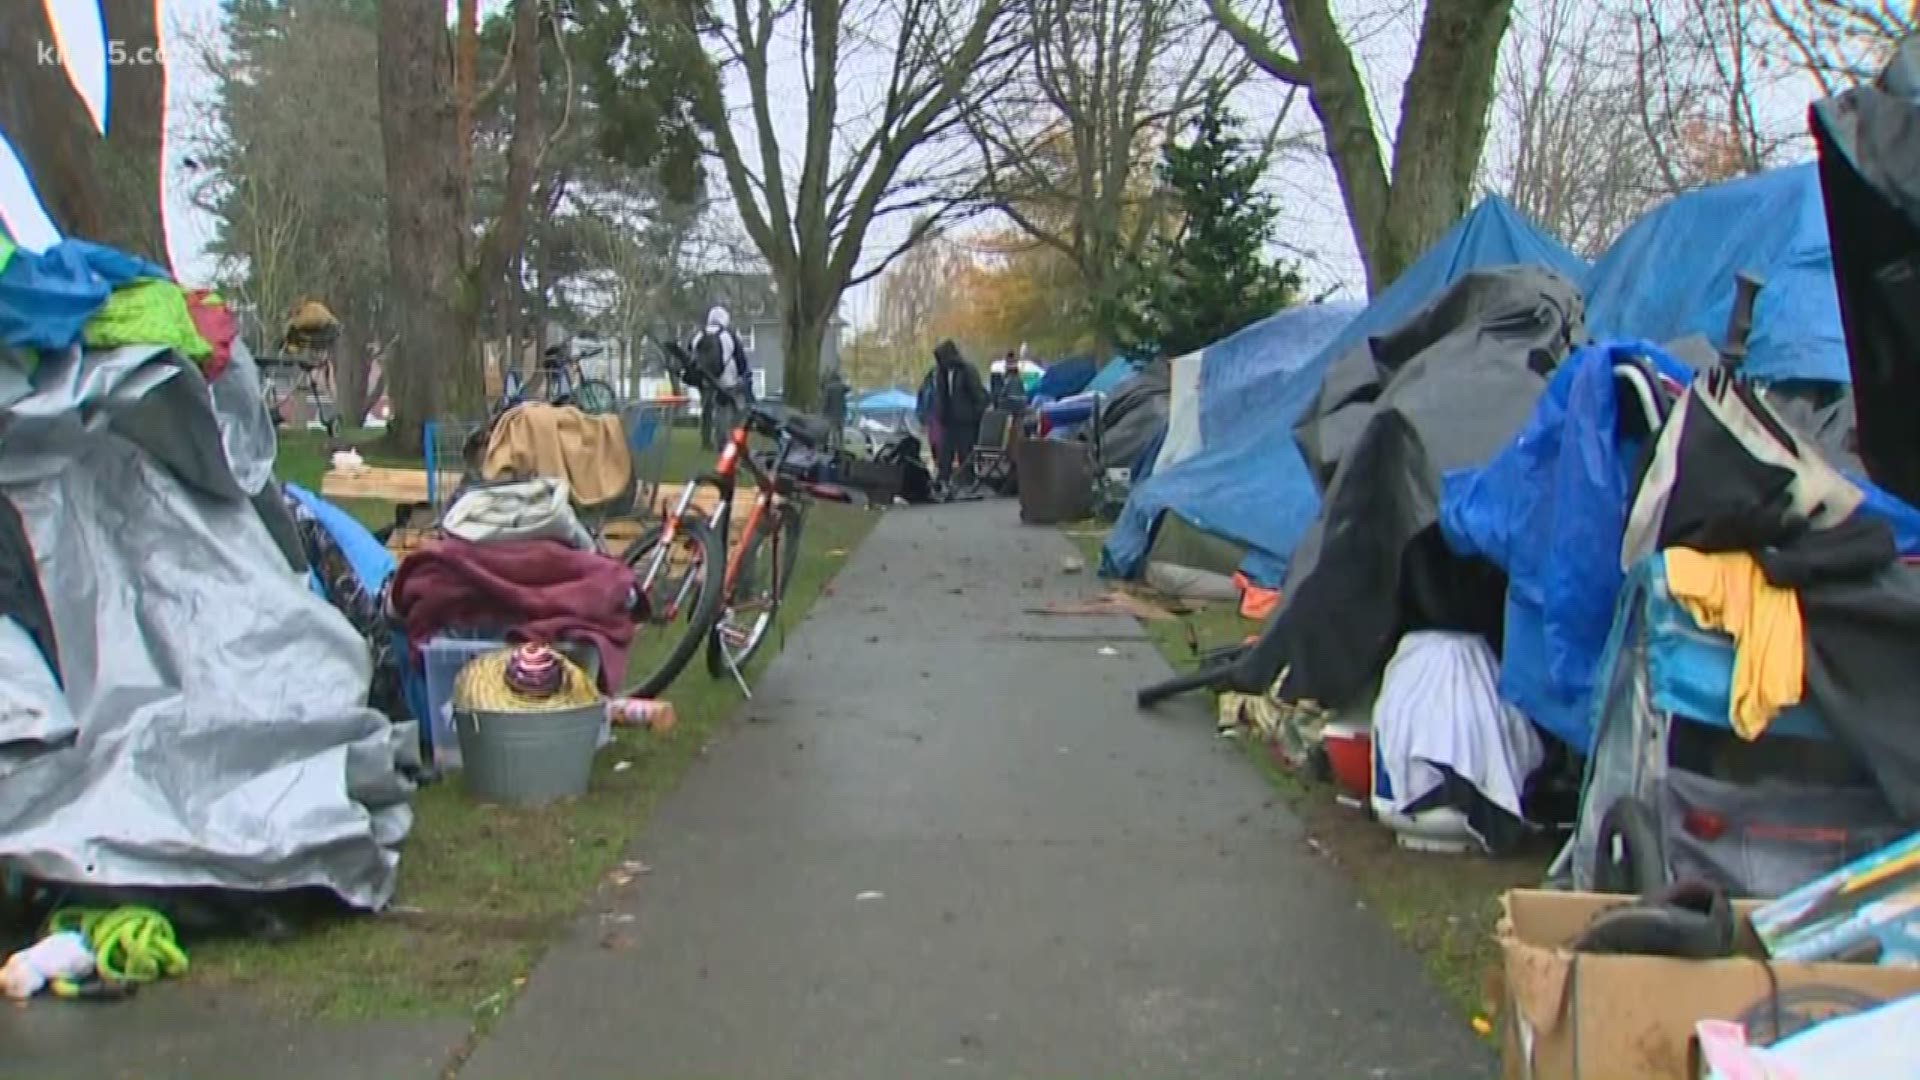 A rapidly growing homeless population is one of the most viable challenges facing the city of Tacoma.